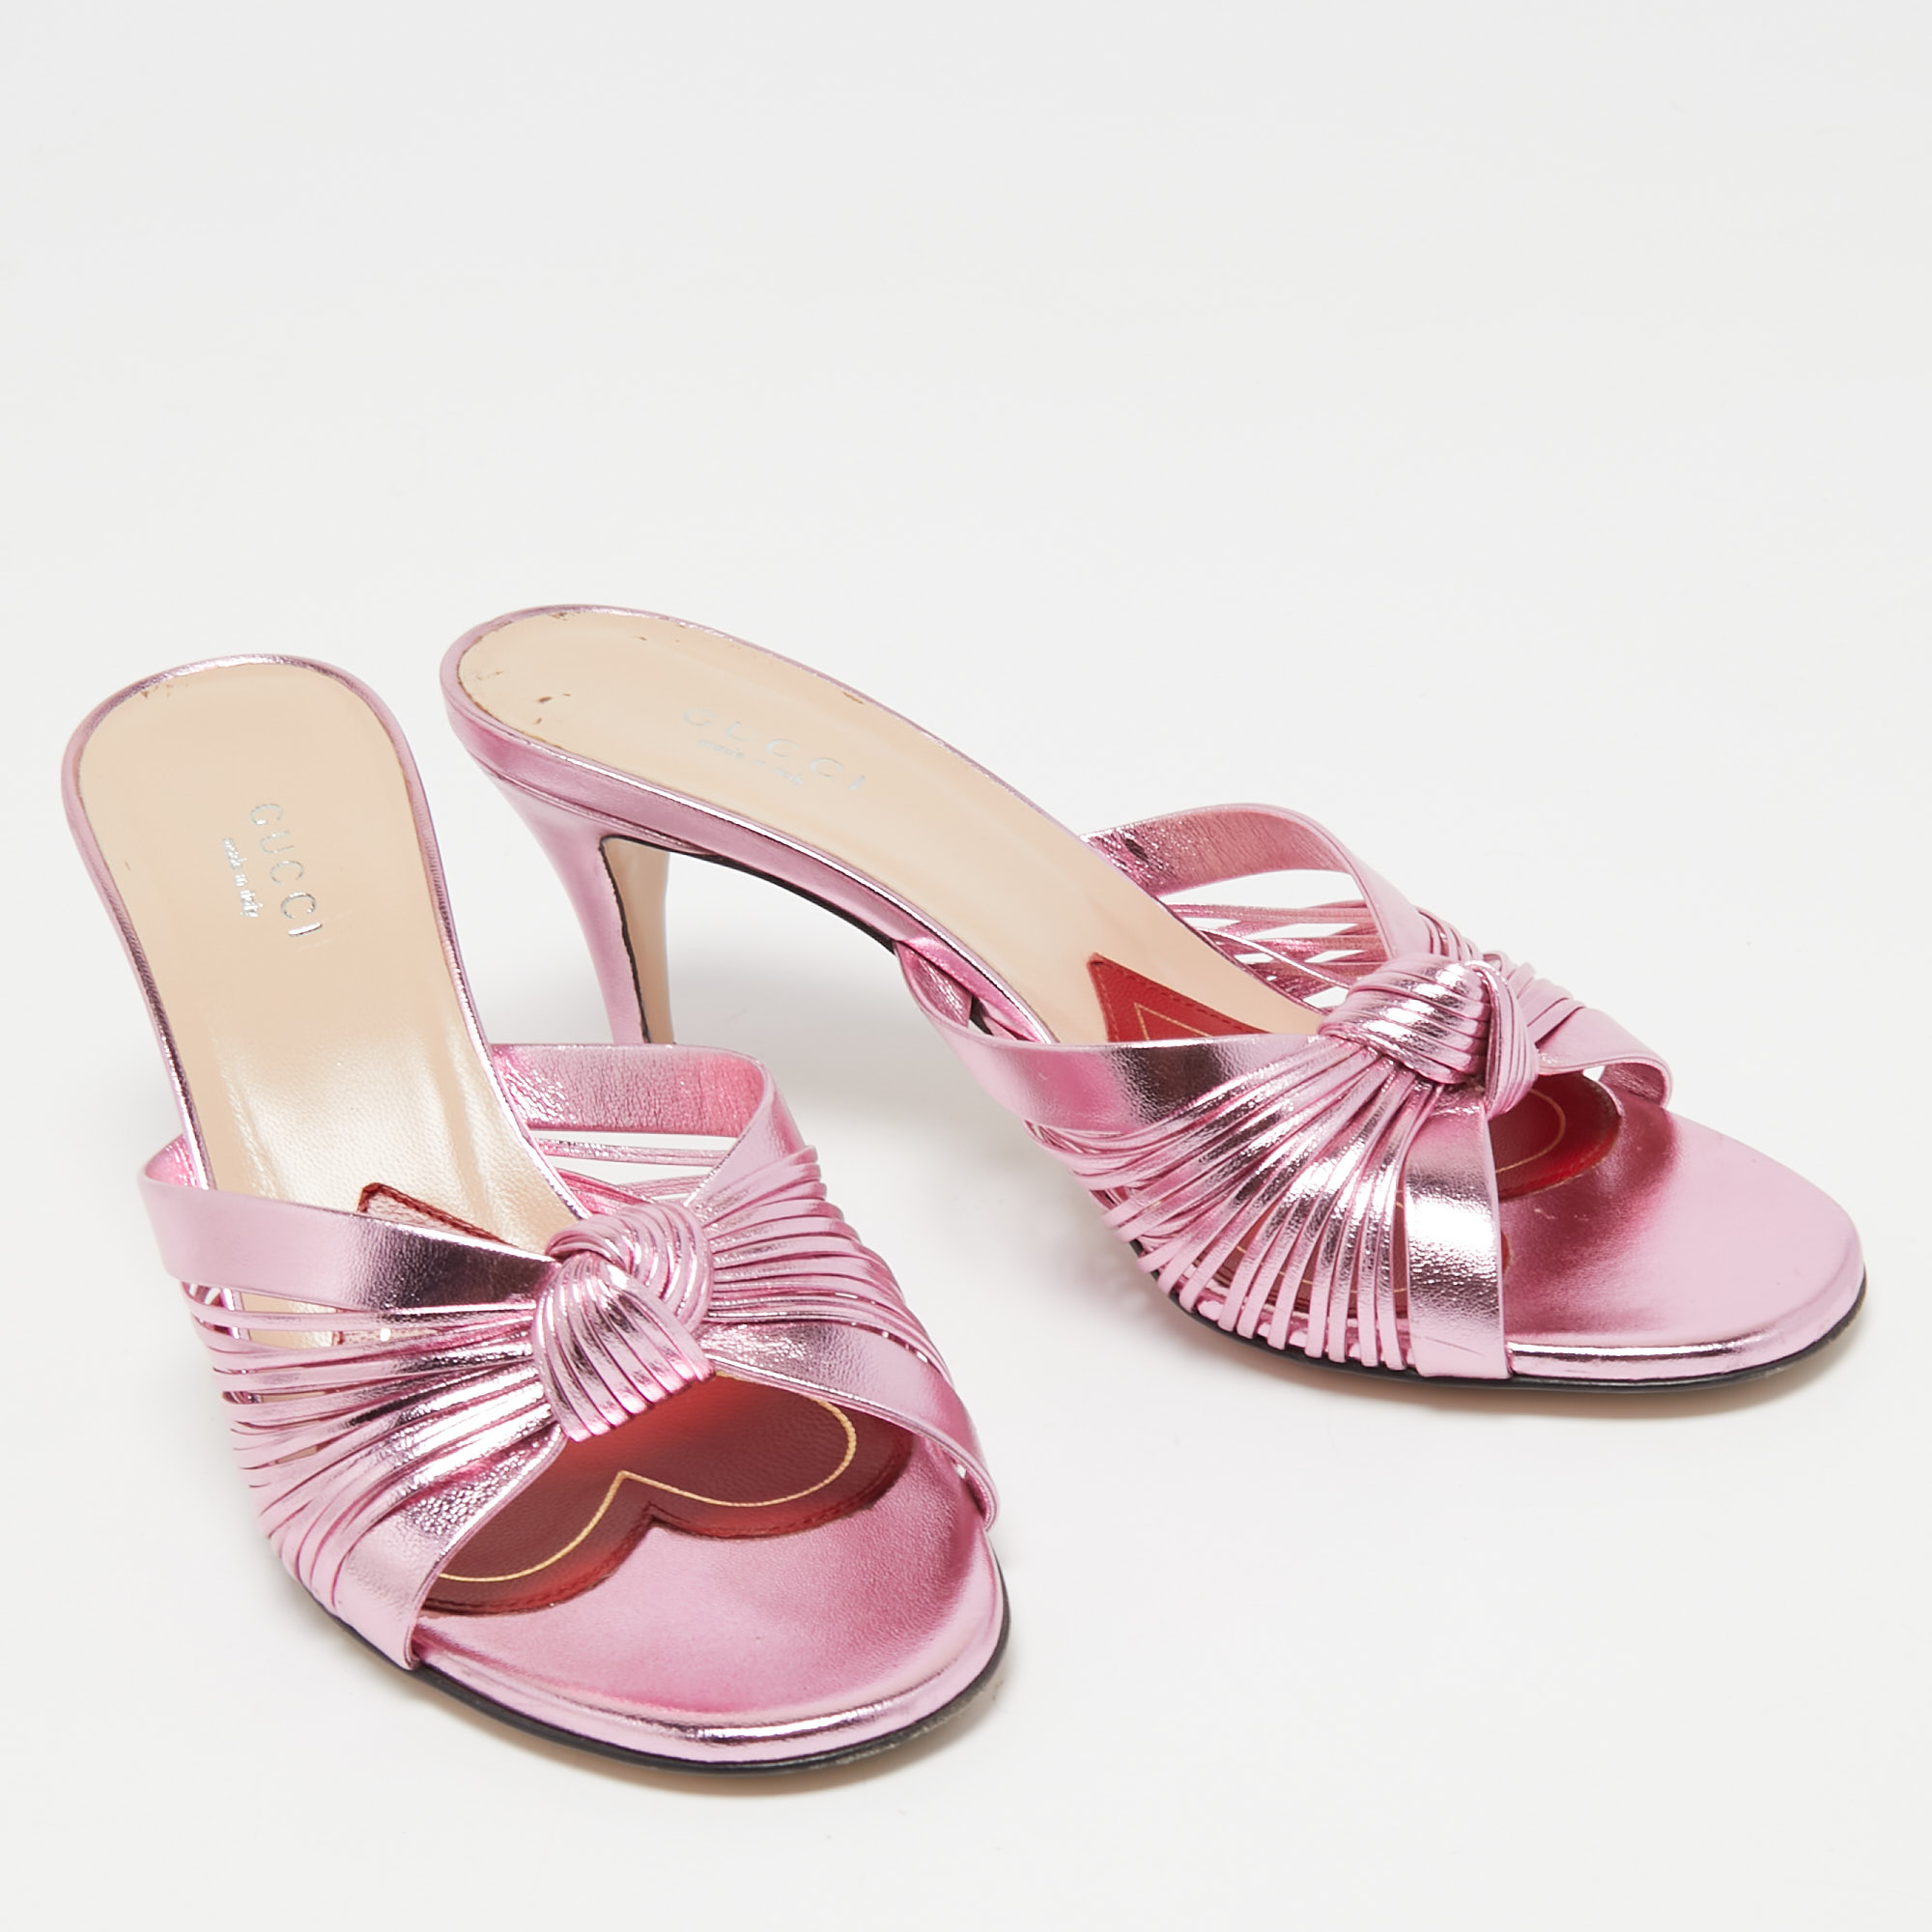 Gucci Metallic Pink Leather Knotted Slide Sandals Size 36.5